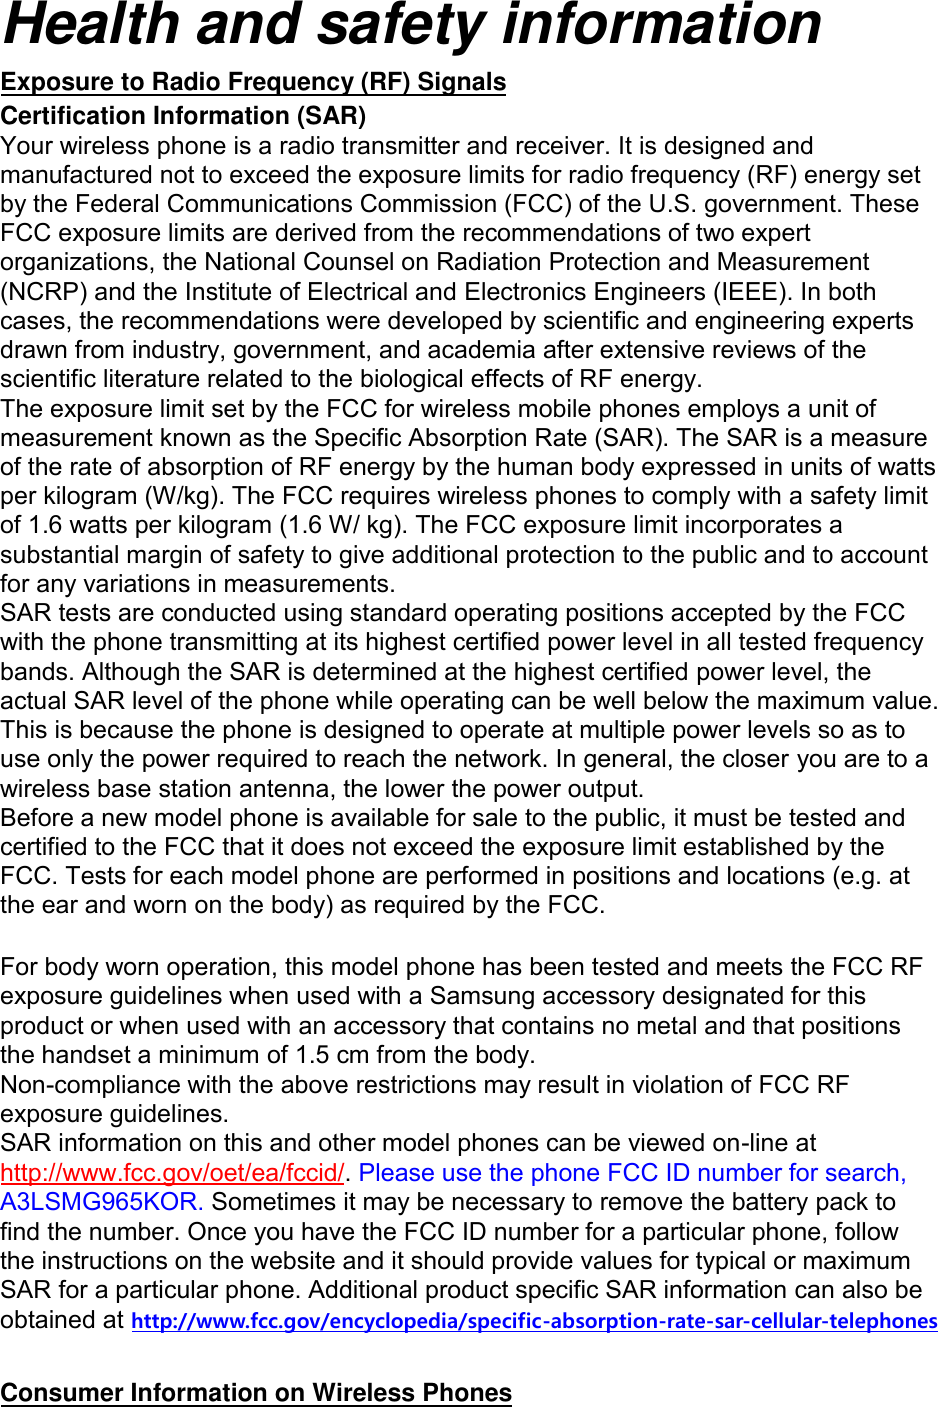 Health and safety informationExposure to Radio Frequency (RF) Signals Certification Information (SAR) Your wireless phone is a radio transmitter and receiver. It is designed and manufactured not to exceed the exposure limits for radio frequency (RF) energy set by the Federal Communications Commission (FCC) of the U.S. government. These FCC exposure limits are derived from the recommendations of two expert organizations, the National Counsel on Radiation Protection and Measurement (NCRP) and the Institute of Electrical and Electronics Engineers (IEEE). In both cases, the recommendations were developed by scientific and engineering experts drawn from industry, government, and academia after extensive reviews of the scientific literature related to the biological effects of RF energy.The exposure limit set by the FCC for wireless mobile phones employs a unit of measurement known as the Specific Absorption Rate (SAR). The SAR is a measure of the rate of absorption of RF energy by the human body expressed in units of watts per kilogram (W/kg). The FCC requires wireless phones to comply with a safety limit of 1.6 watts per kilogram (1.6 W/ kg). The FCC exposure limit incorporates a substantial margin of safety to give additional protection to the public and to account for any variations in measurements.SAR tests are conducted using standard operating positions accepted by the FCC with the phone transmitting at its highest certified power level in all tested frequency bands. Although the SAR is determined at the highest certified power level, the actual SAR level of the phone while operating can be well below the maximum value. This is because the phone is designed to operate at multiple power levels so as to use only the power required to reach the network. In general, the closer you are to a wireless base station antenna, the lower the power output. Before a new model phone is available for sale to the public, it must be tested and certified to the FCC that it does not exceed the exposure limit established by the FCC. Tests for each model phone are performed in positions and locations (e.g. at the ear and worn on the body) as required by the FCC.    For body worn operation, this model phone has been tested and meets the FCC RF exposure guidelines when used with a Samsung accessory designated for this product or when used with an accessory that contains no metal and that positions the handset a minimum of 1.5 cm from the body.   Non-compliance with the above restrictions may result in violation of FCC RF exposure guidelines. SAR information on this and other model phones can be viewed on-line at http://www.fcc.gov/oet/ea/fccid/. Please use the phone FCC ID number for search, A3LSMG965KOR. Sometimes it may be necessary to remove the battery pack to find the number. Once you have the FCC ID number for a particular phone, follow the instructions on the website and it should provide values for typical or maximum SAR for a particular phone. Additional product specific SAR information can also be obtained at http://www.fcc.gov/encyclopedia/specific-absorption-rate-sar-cellular-telephonesConsumer Information on Wireless Phones